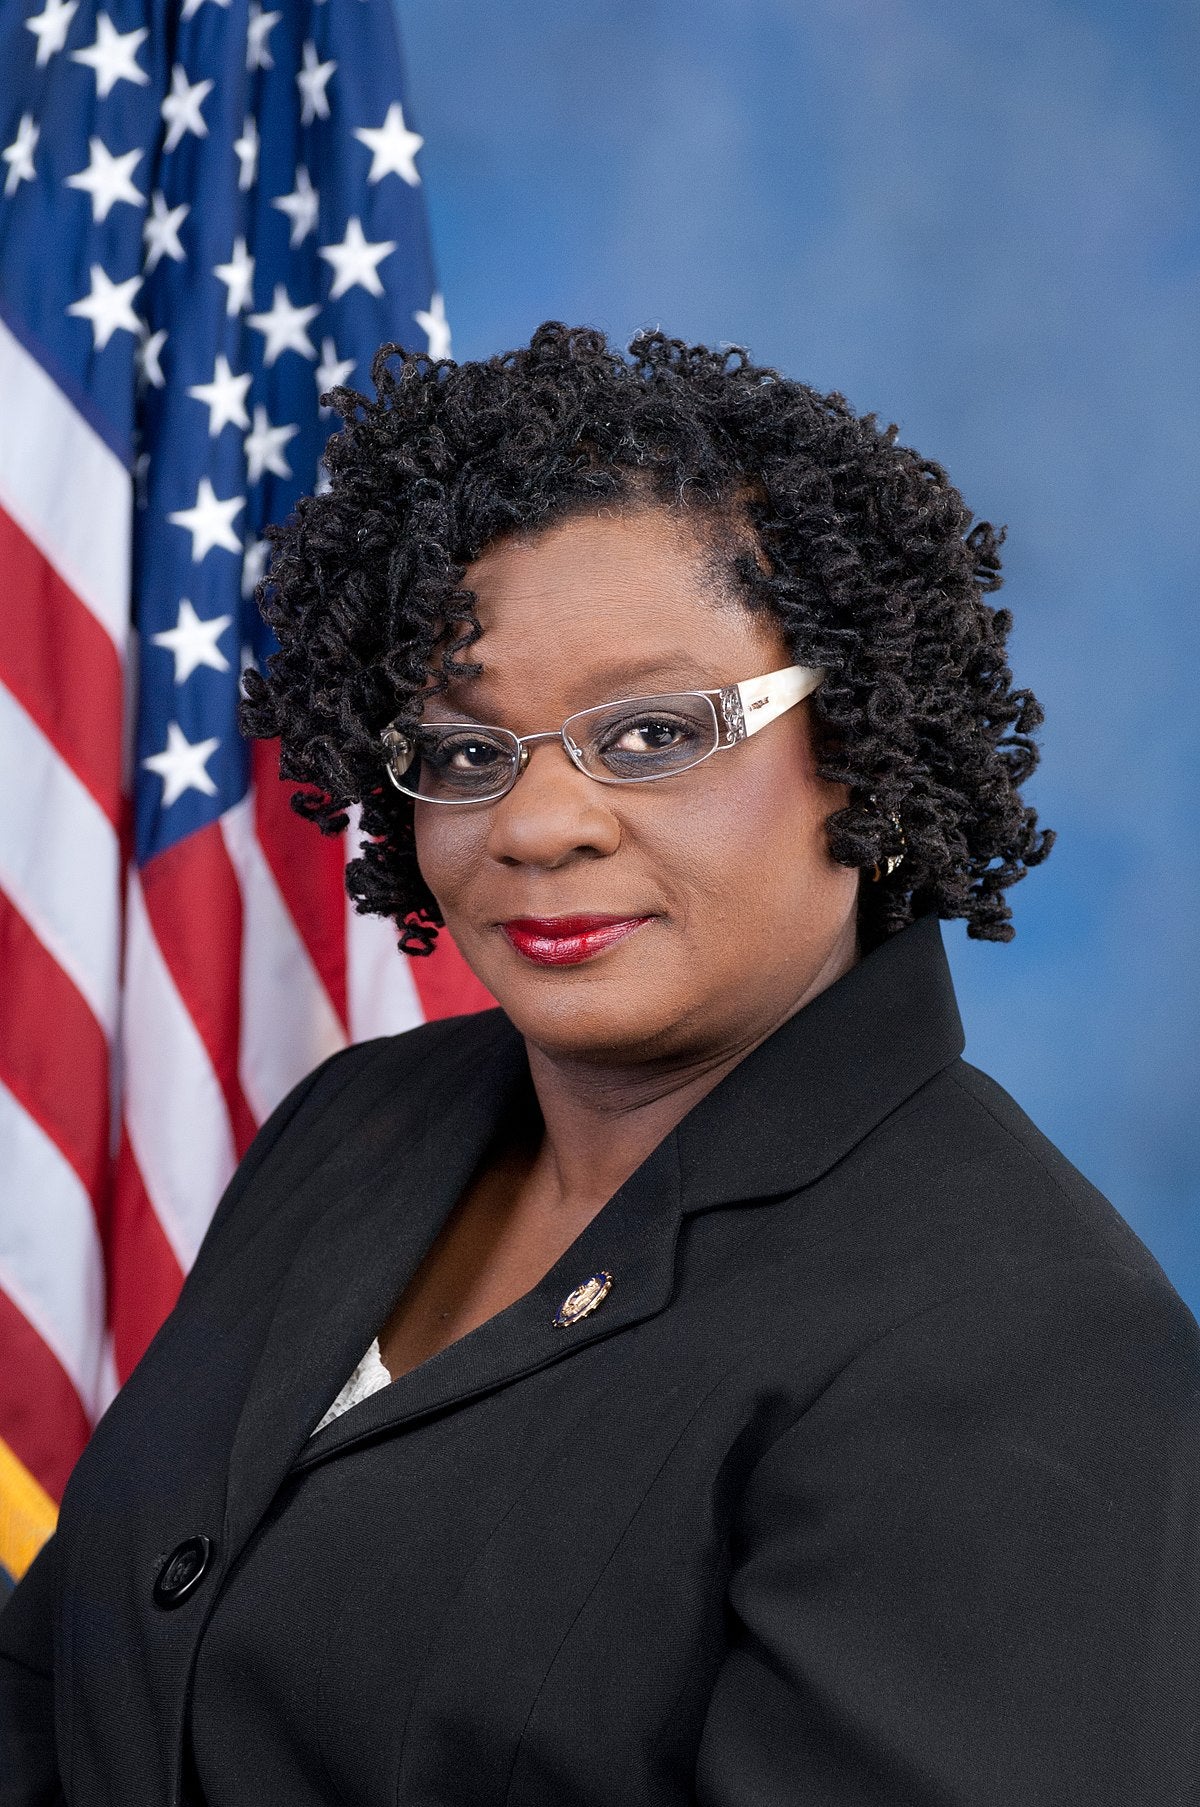 Rep. Gwen Moore, Democratic Candidate For Wisconsin’s 4th Congressional District